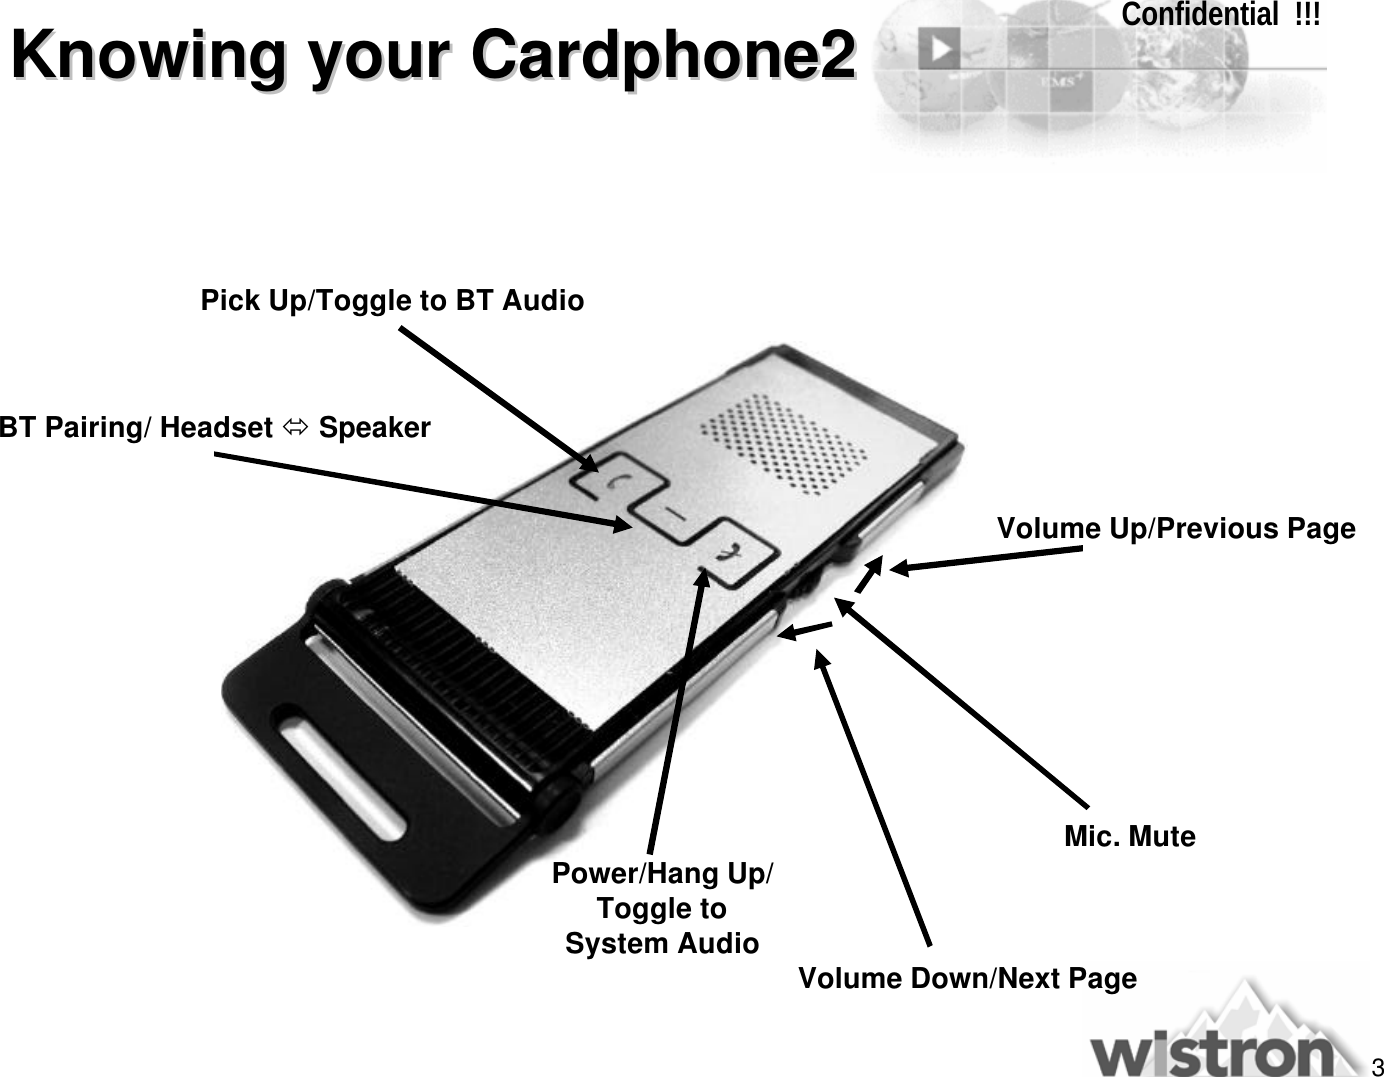 3Confidential  !!! Knowing your Cardphone2Knowing your Cardphone2Pick Up/Toggle to BT AudioBT Pairing/ Headset óSpeakerPower/Hang Up/ Toggle to System AudioVolume Up/Previous PageMic. MuteVolume Down/Next Page